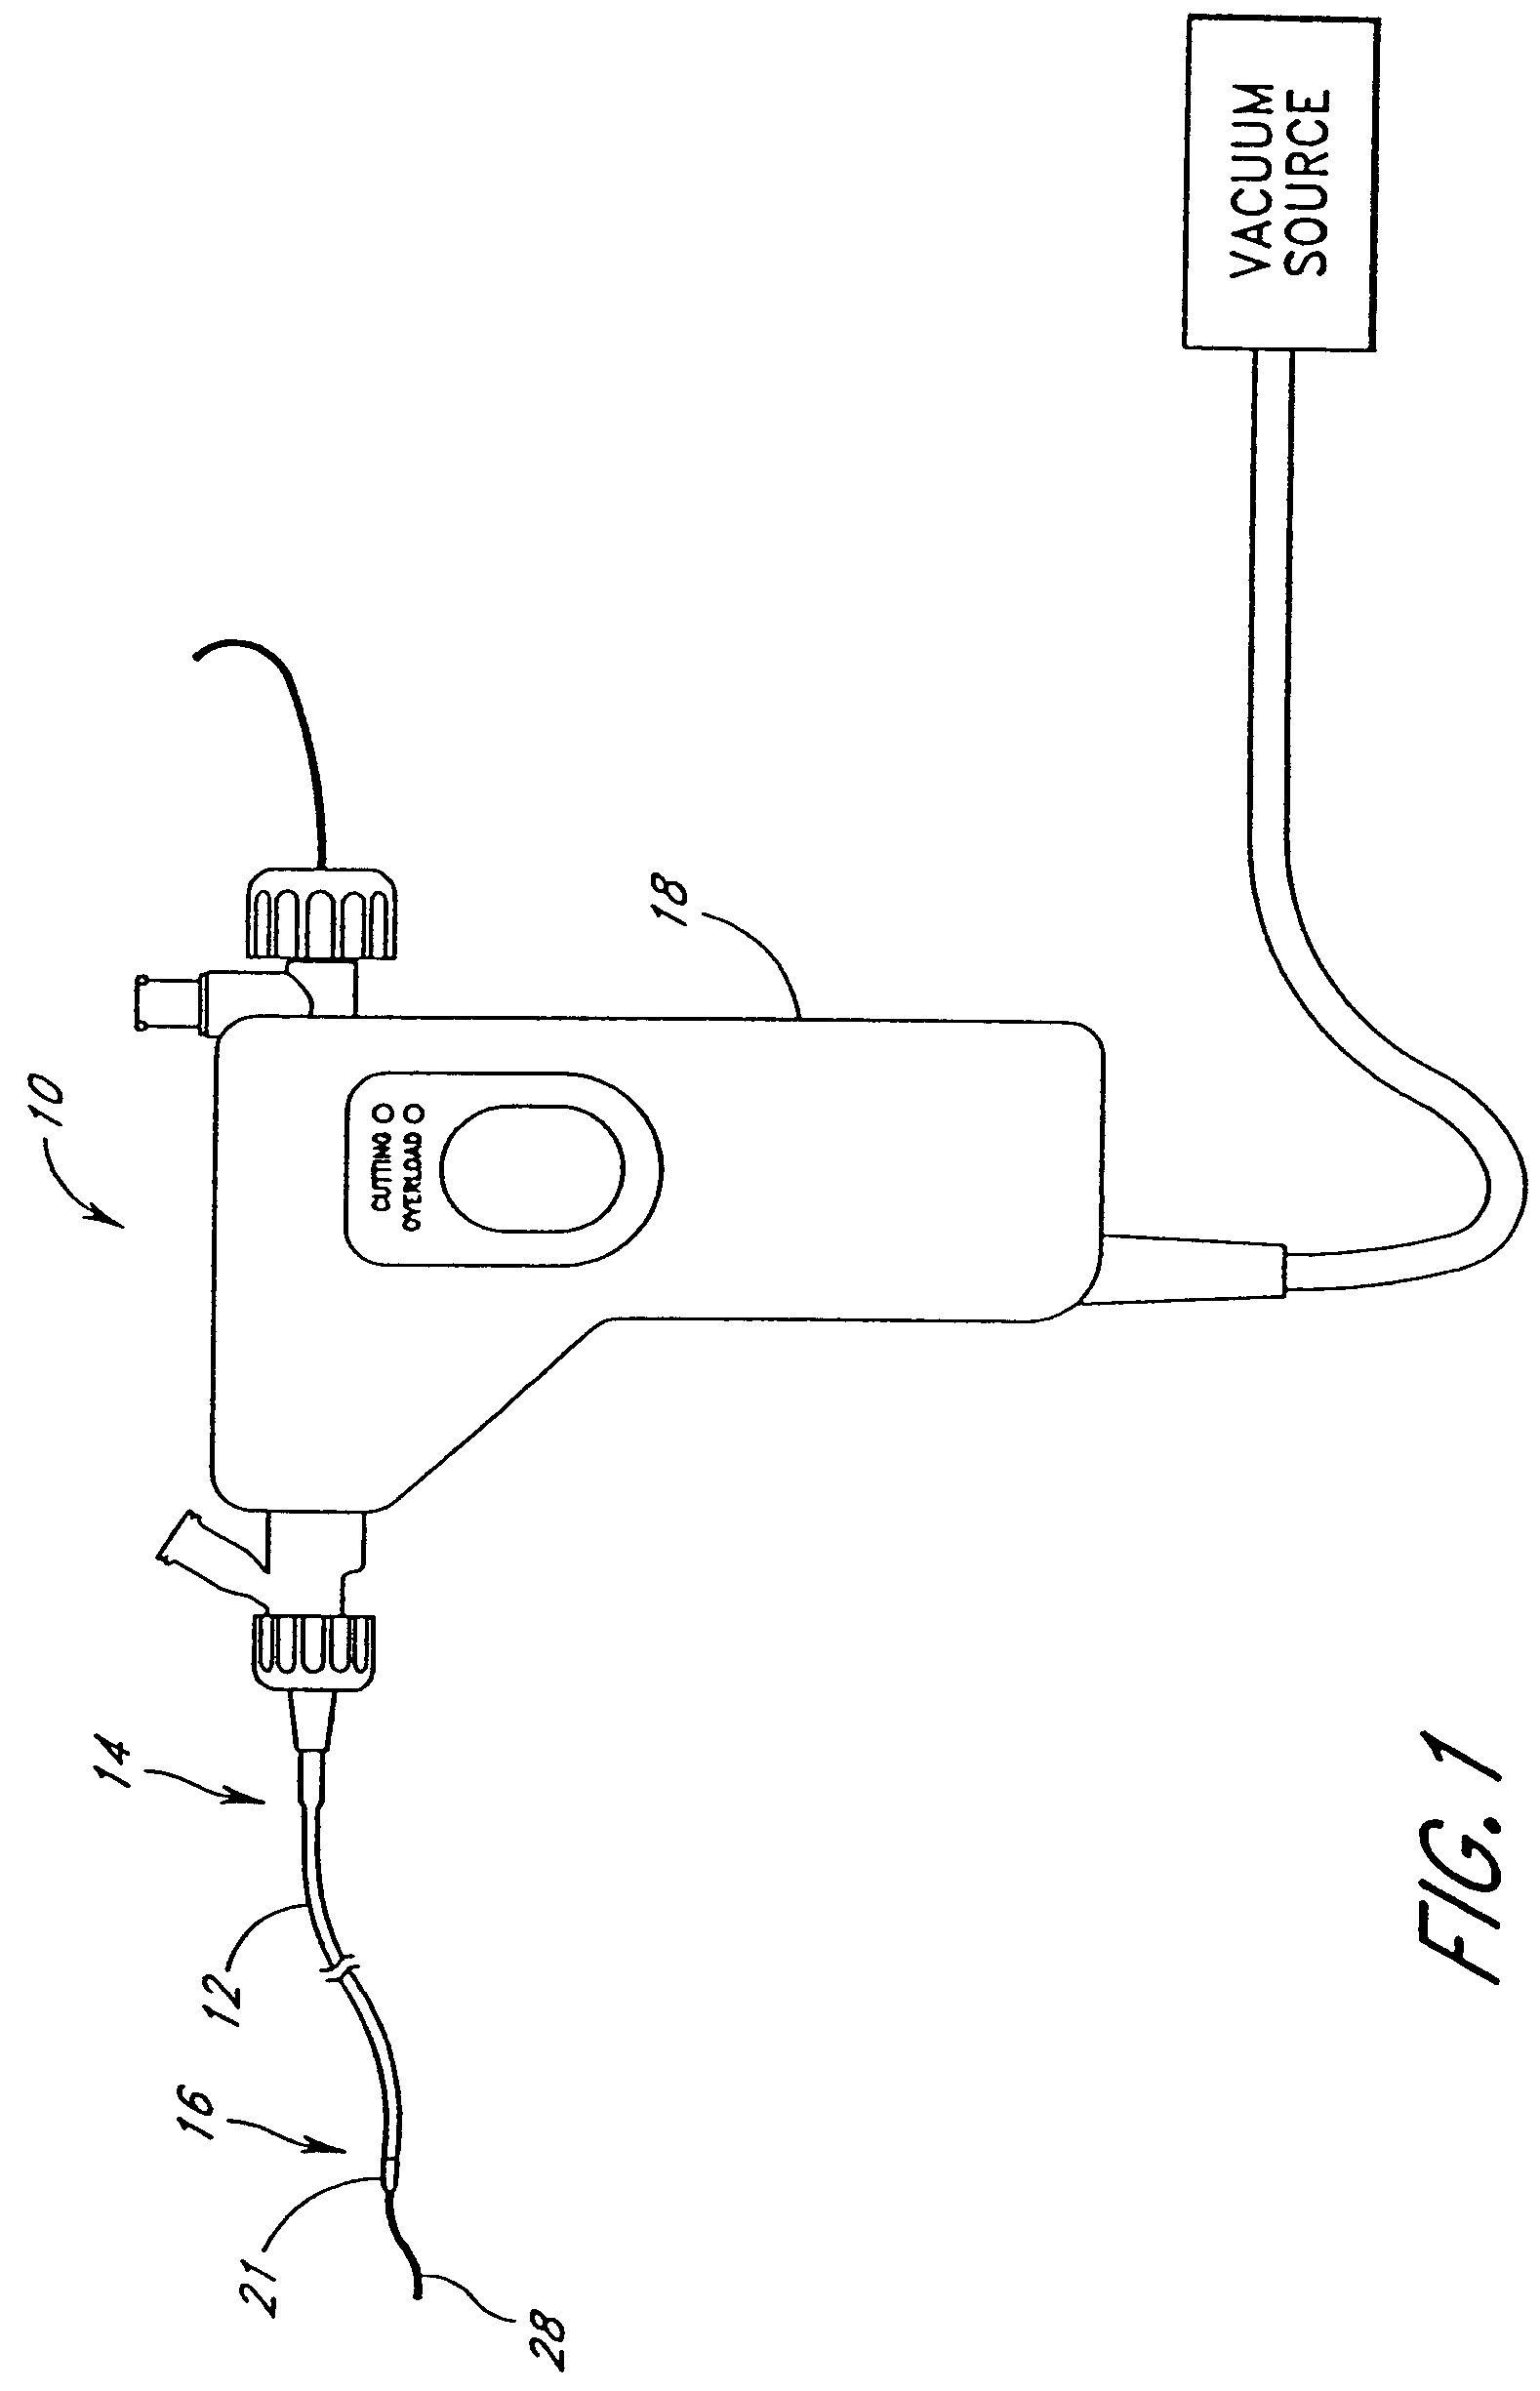 Rotational atherectomy system with stationary cutting elements